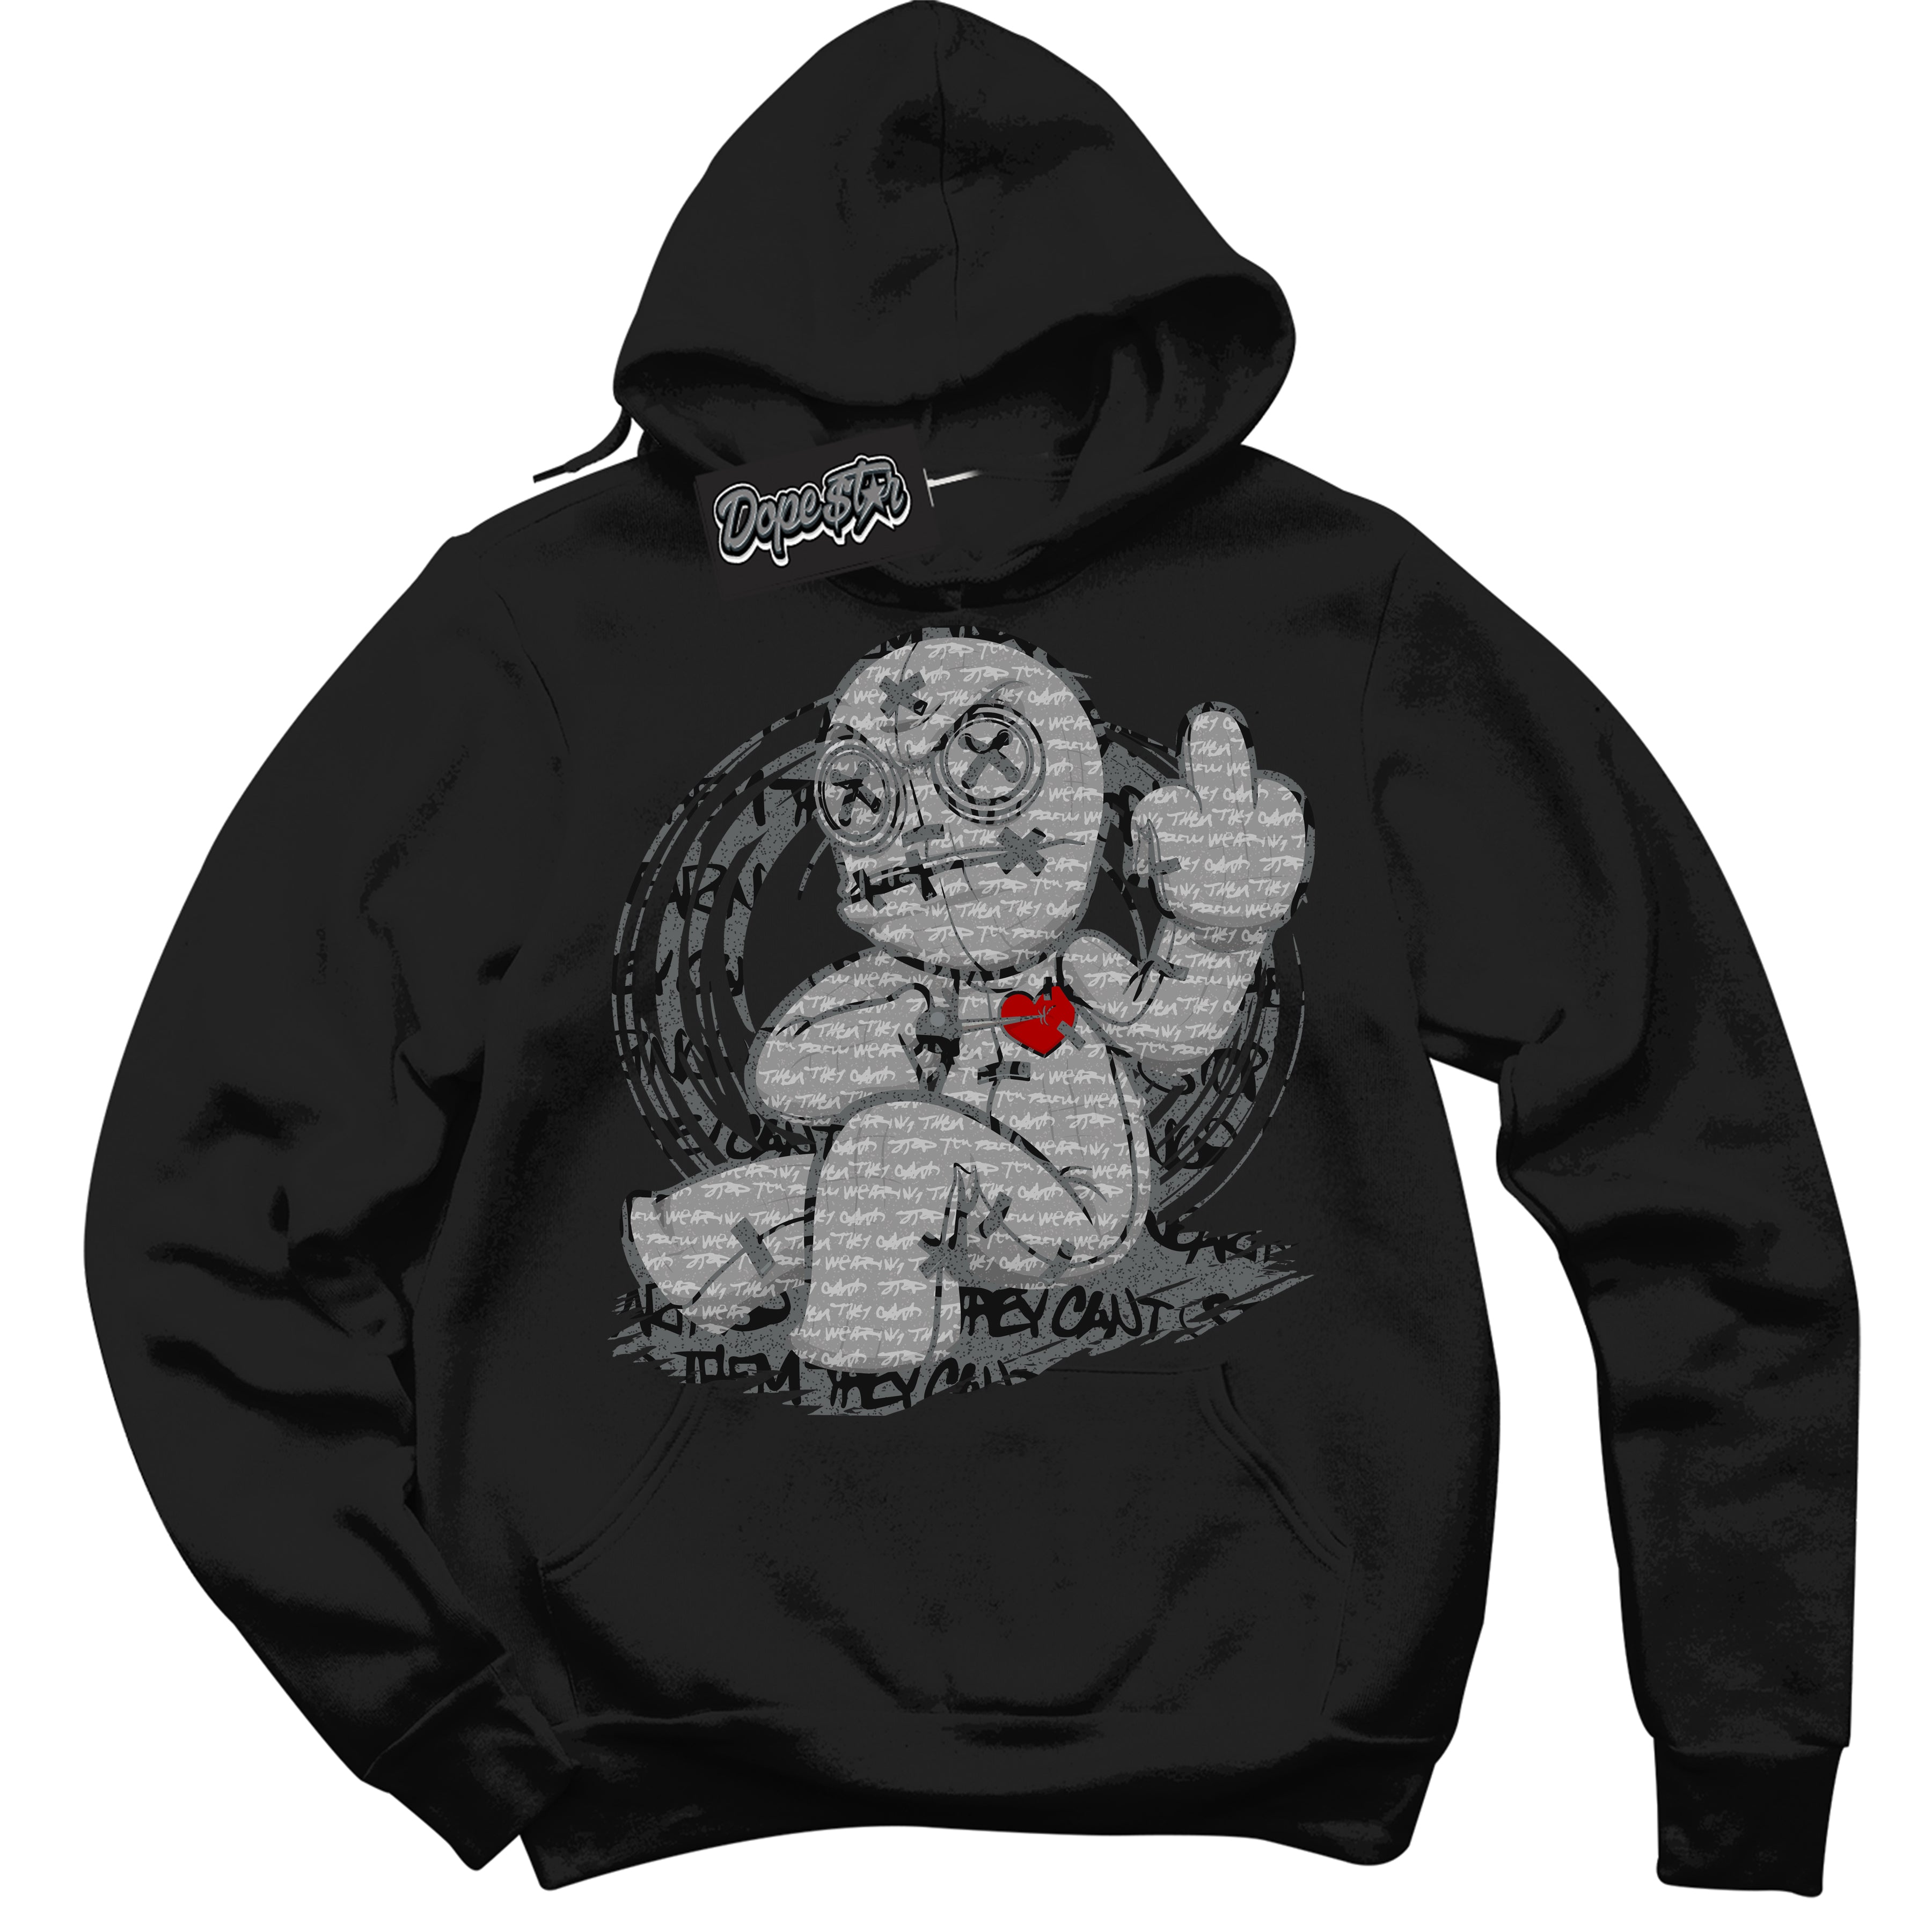 Cool Black Hoodie with “ VooDoo Doll ”  design that Perfectly Matches Rebellionaire 1s Sneakers.